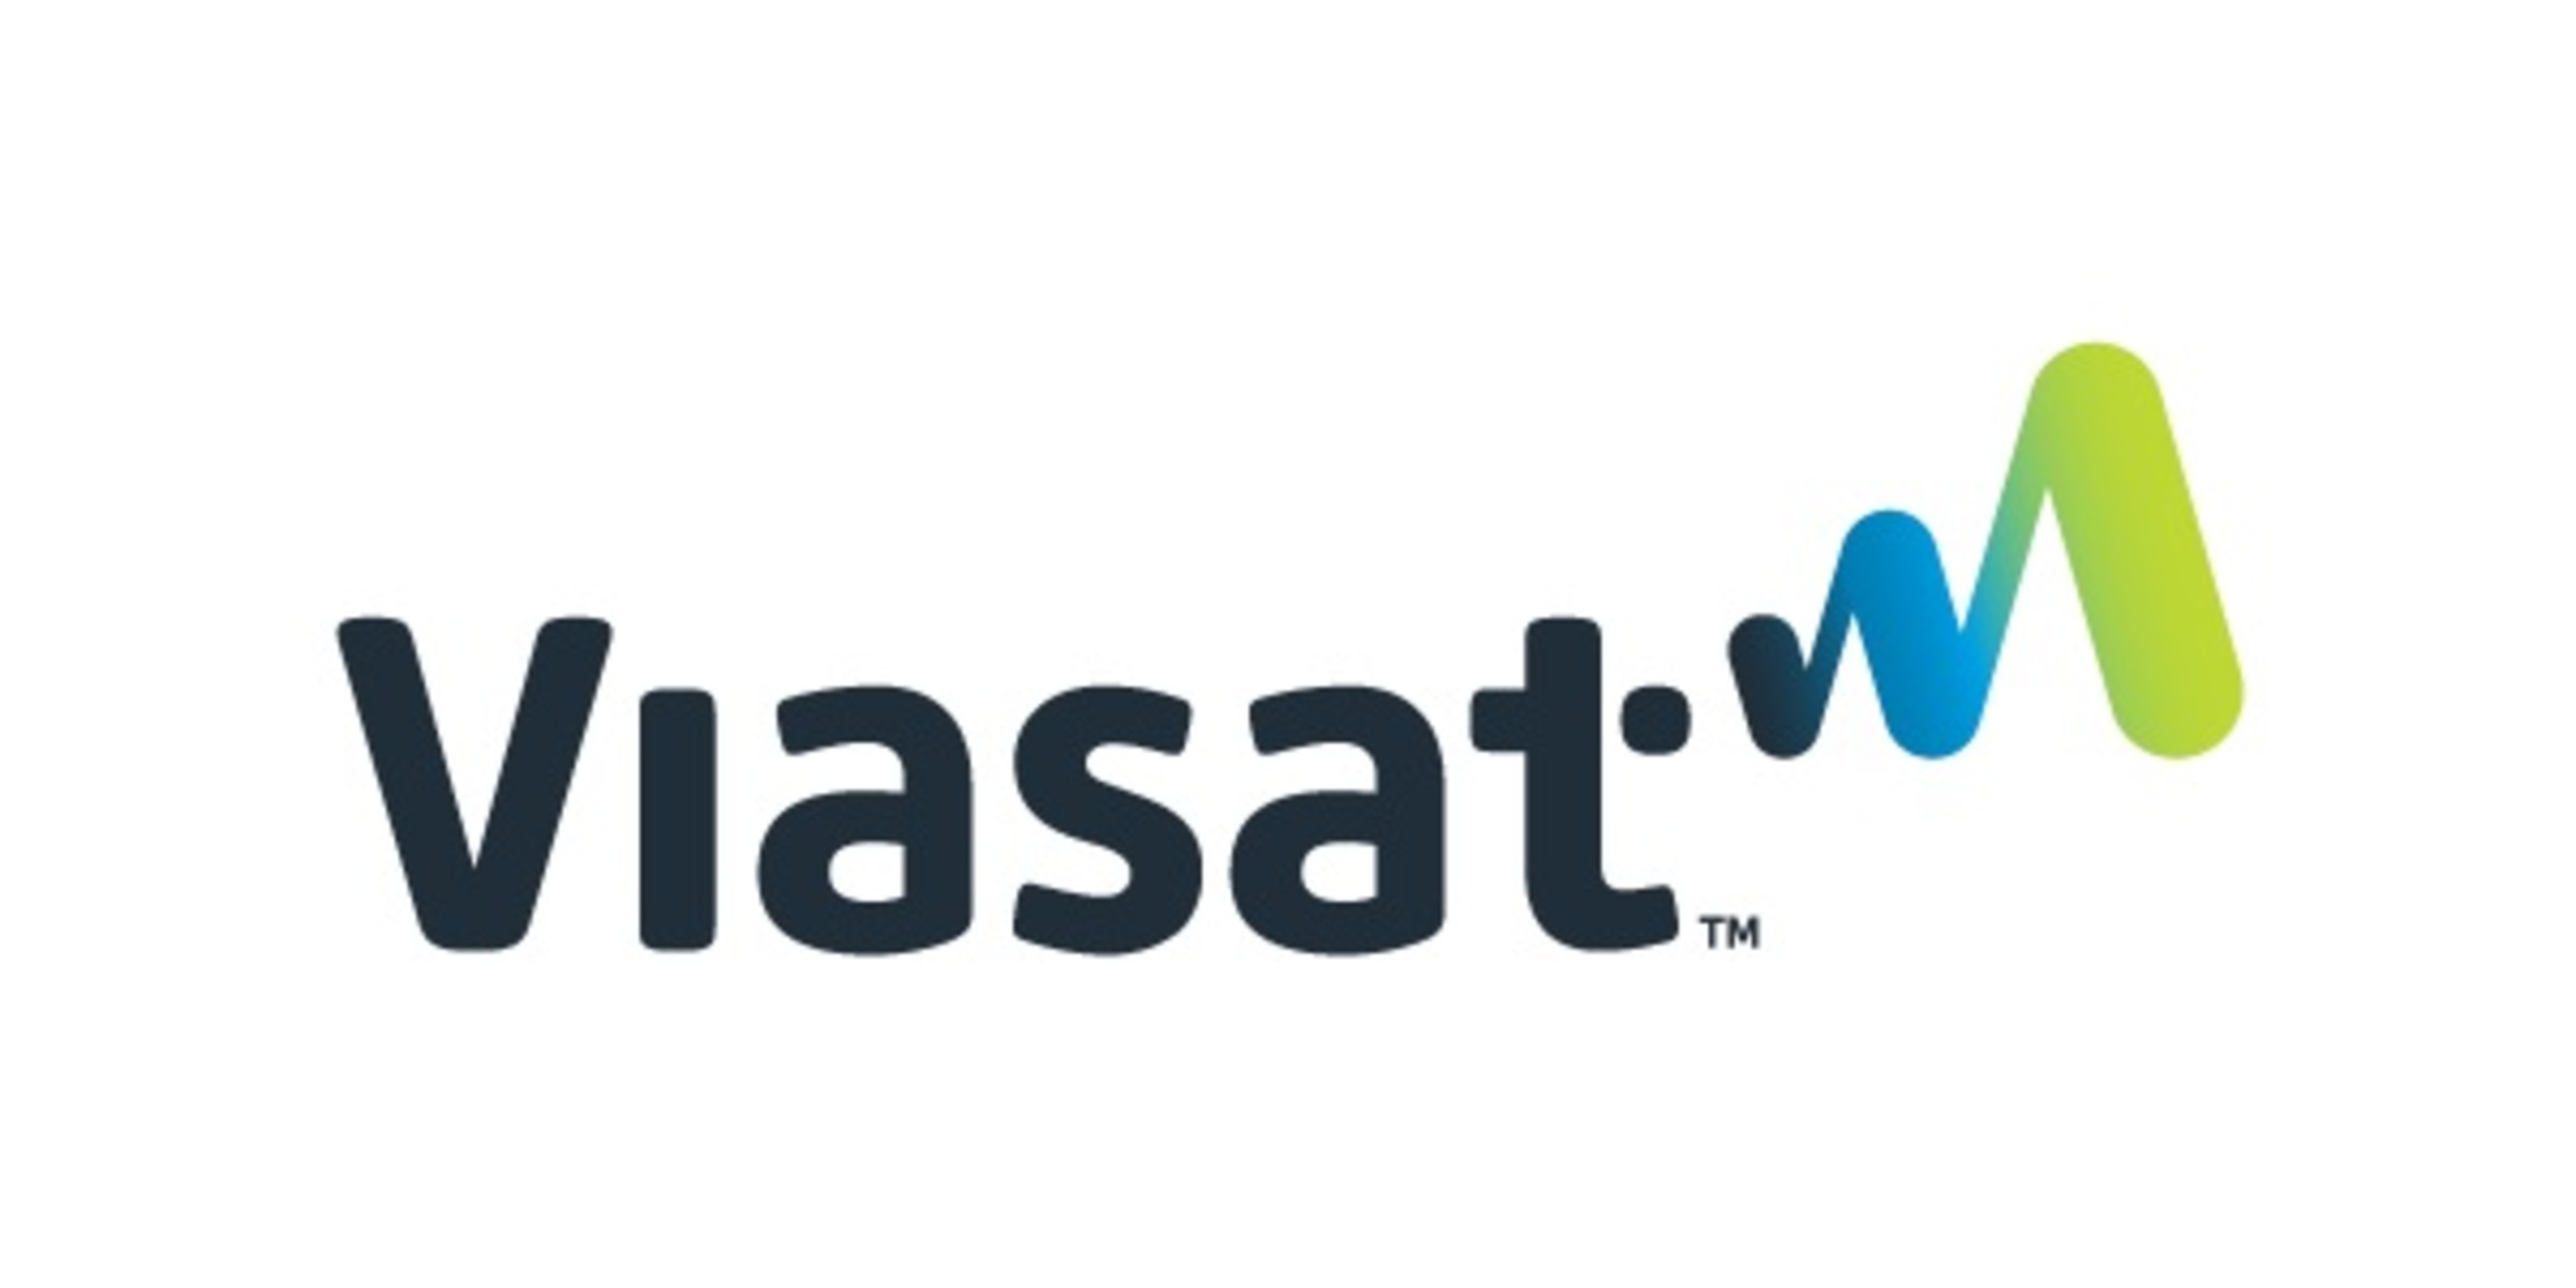 ViaSat creates new ways to access advanced network applications with satellite and other wireless networking systems that enable fast, secure, and efficient communications to any location. The company provides networking products and services for enterprise and consumer IP applications and is a key supplier of military communications and encryption technologies to the U.S. government.